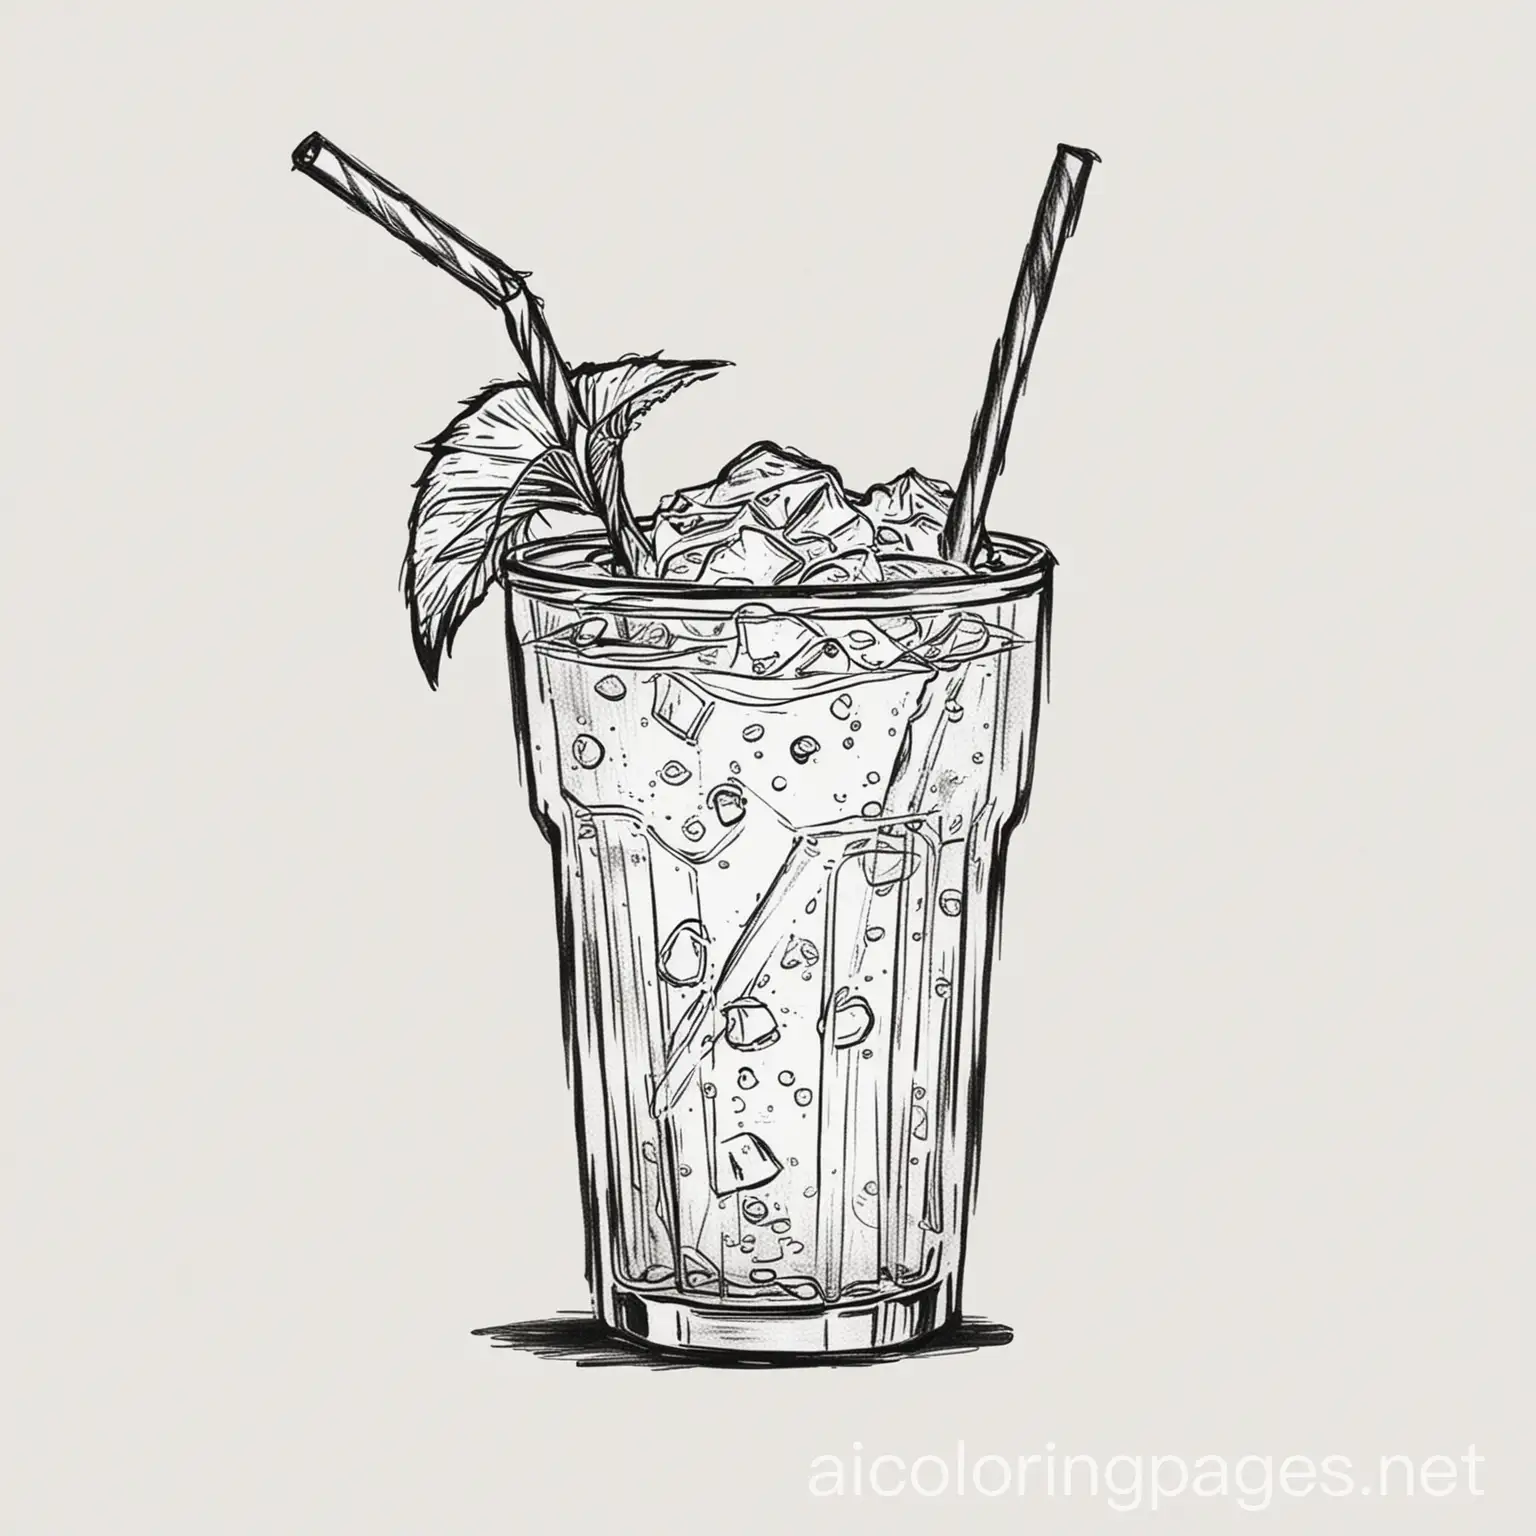 Summer drink with straw, Coloring Page, black and white, line art, white background, Simplicity, Ample White Space. The background of the coloring page is plain white to make it easy for young children to color within the lines. The outlines of all the subjects are easy to distinguish, making it simple for kids to color without too much difficulty